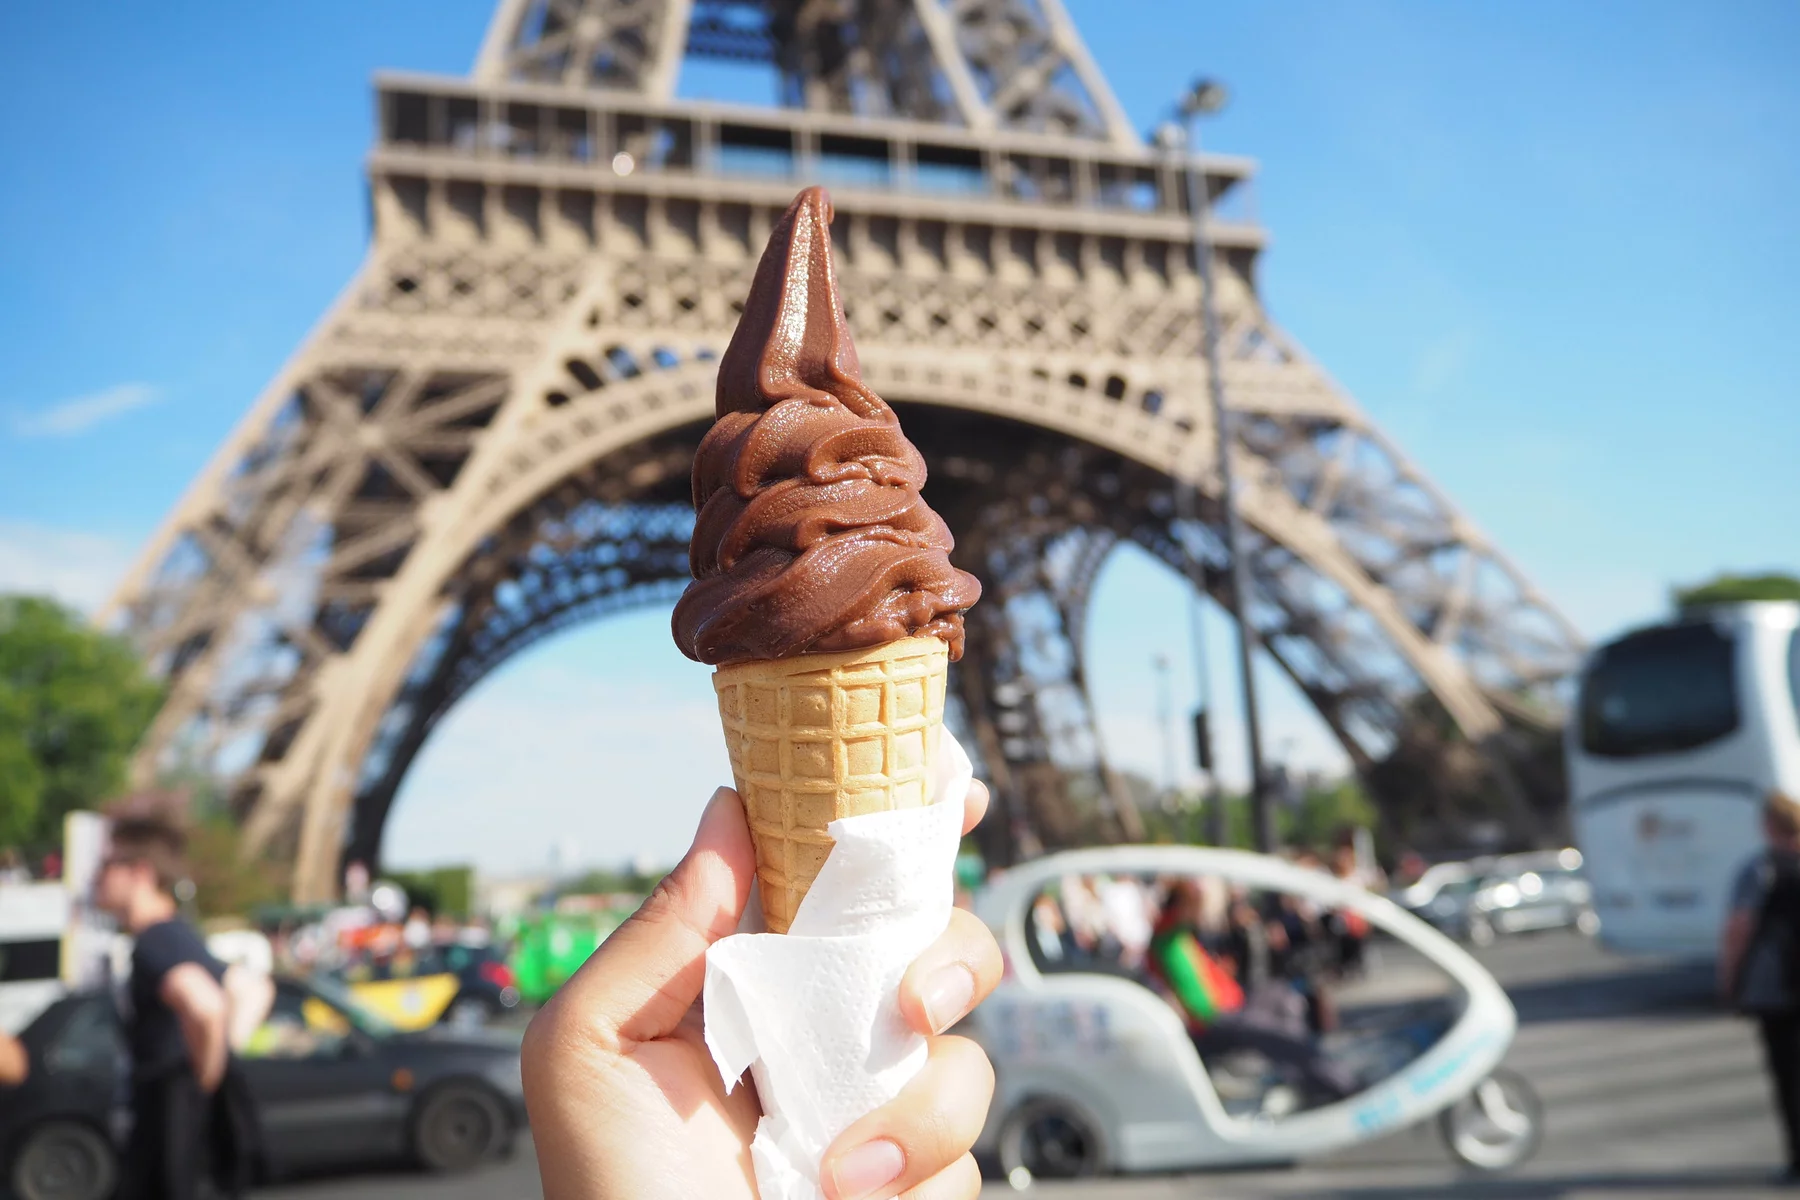 Ice cream in front of the Eiffel Tower